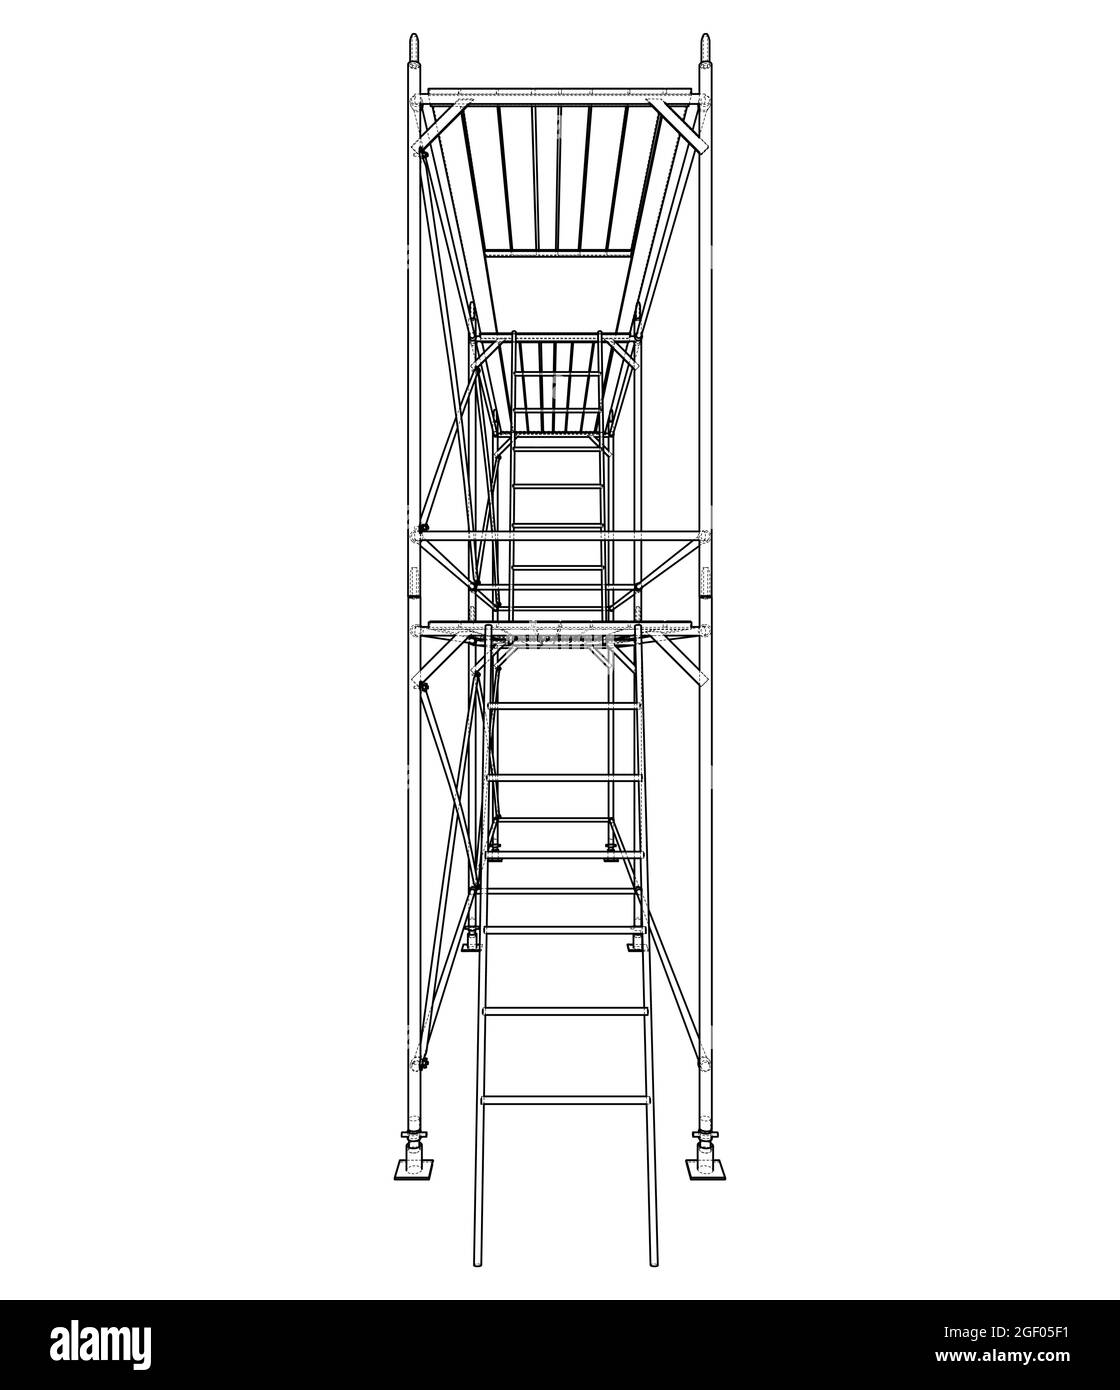 PDF Code of Practice for Metal Scaffolding Safety  Semantic Scholar